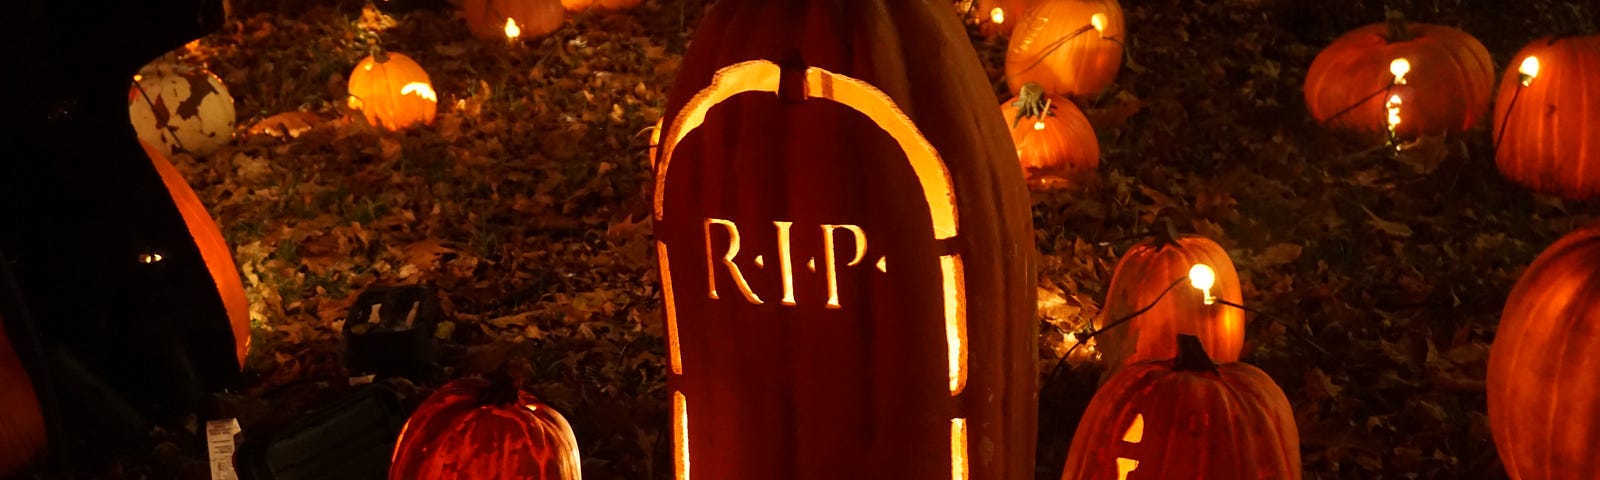 Three carved pumpkings, lit up at night. The middle one says RIP.